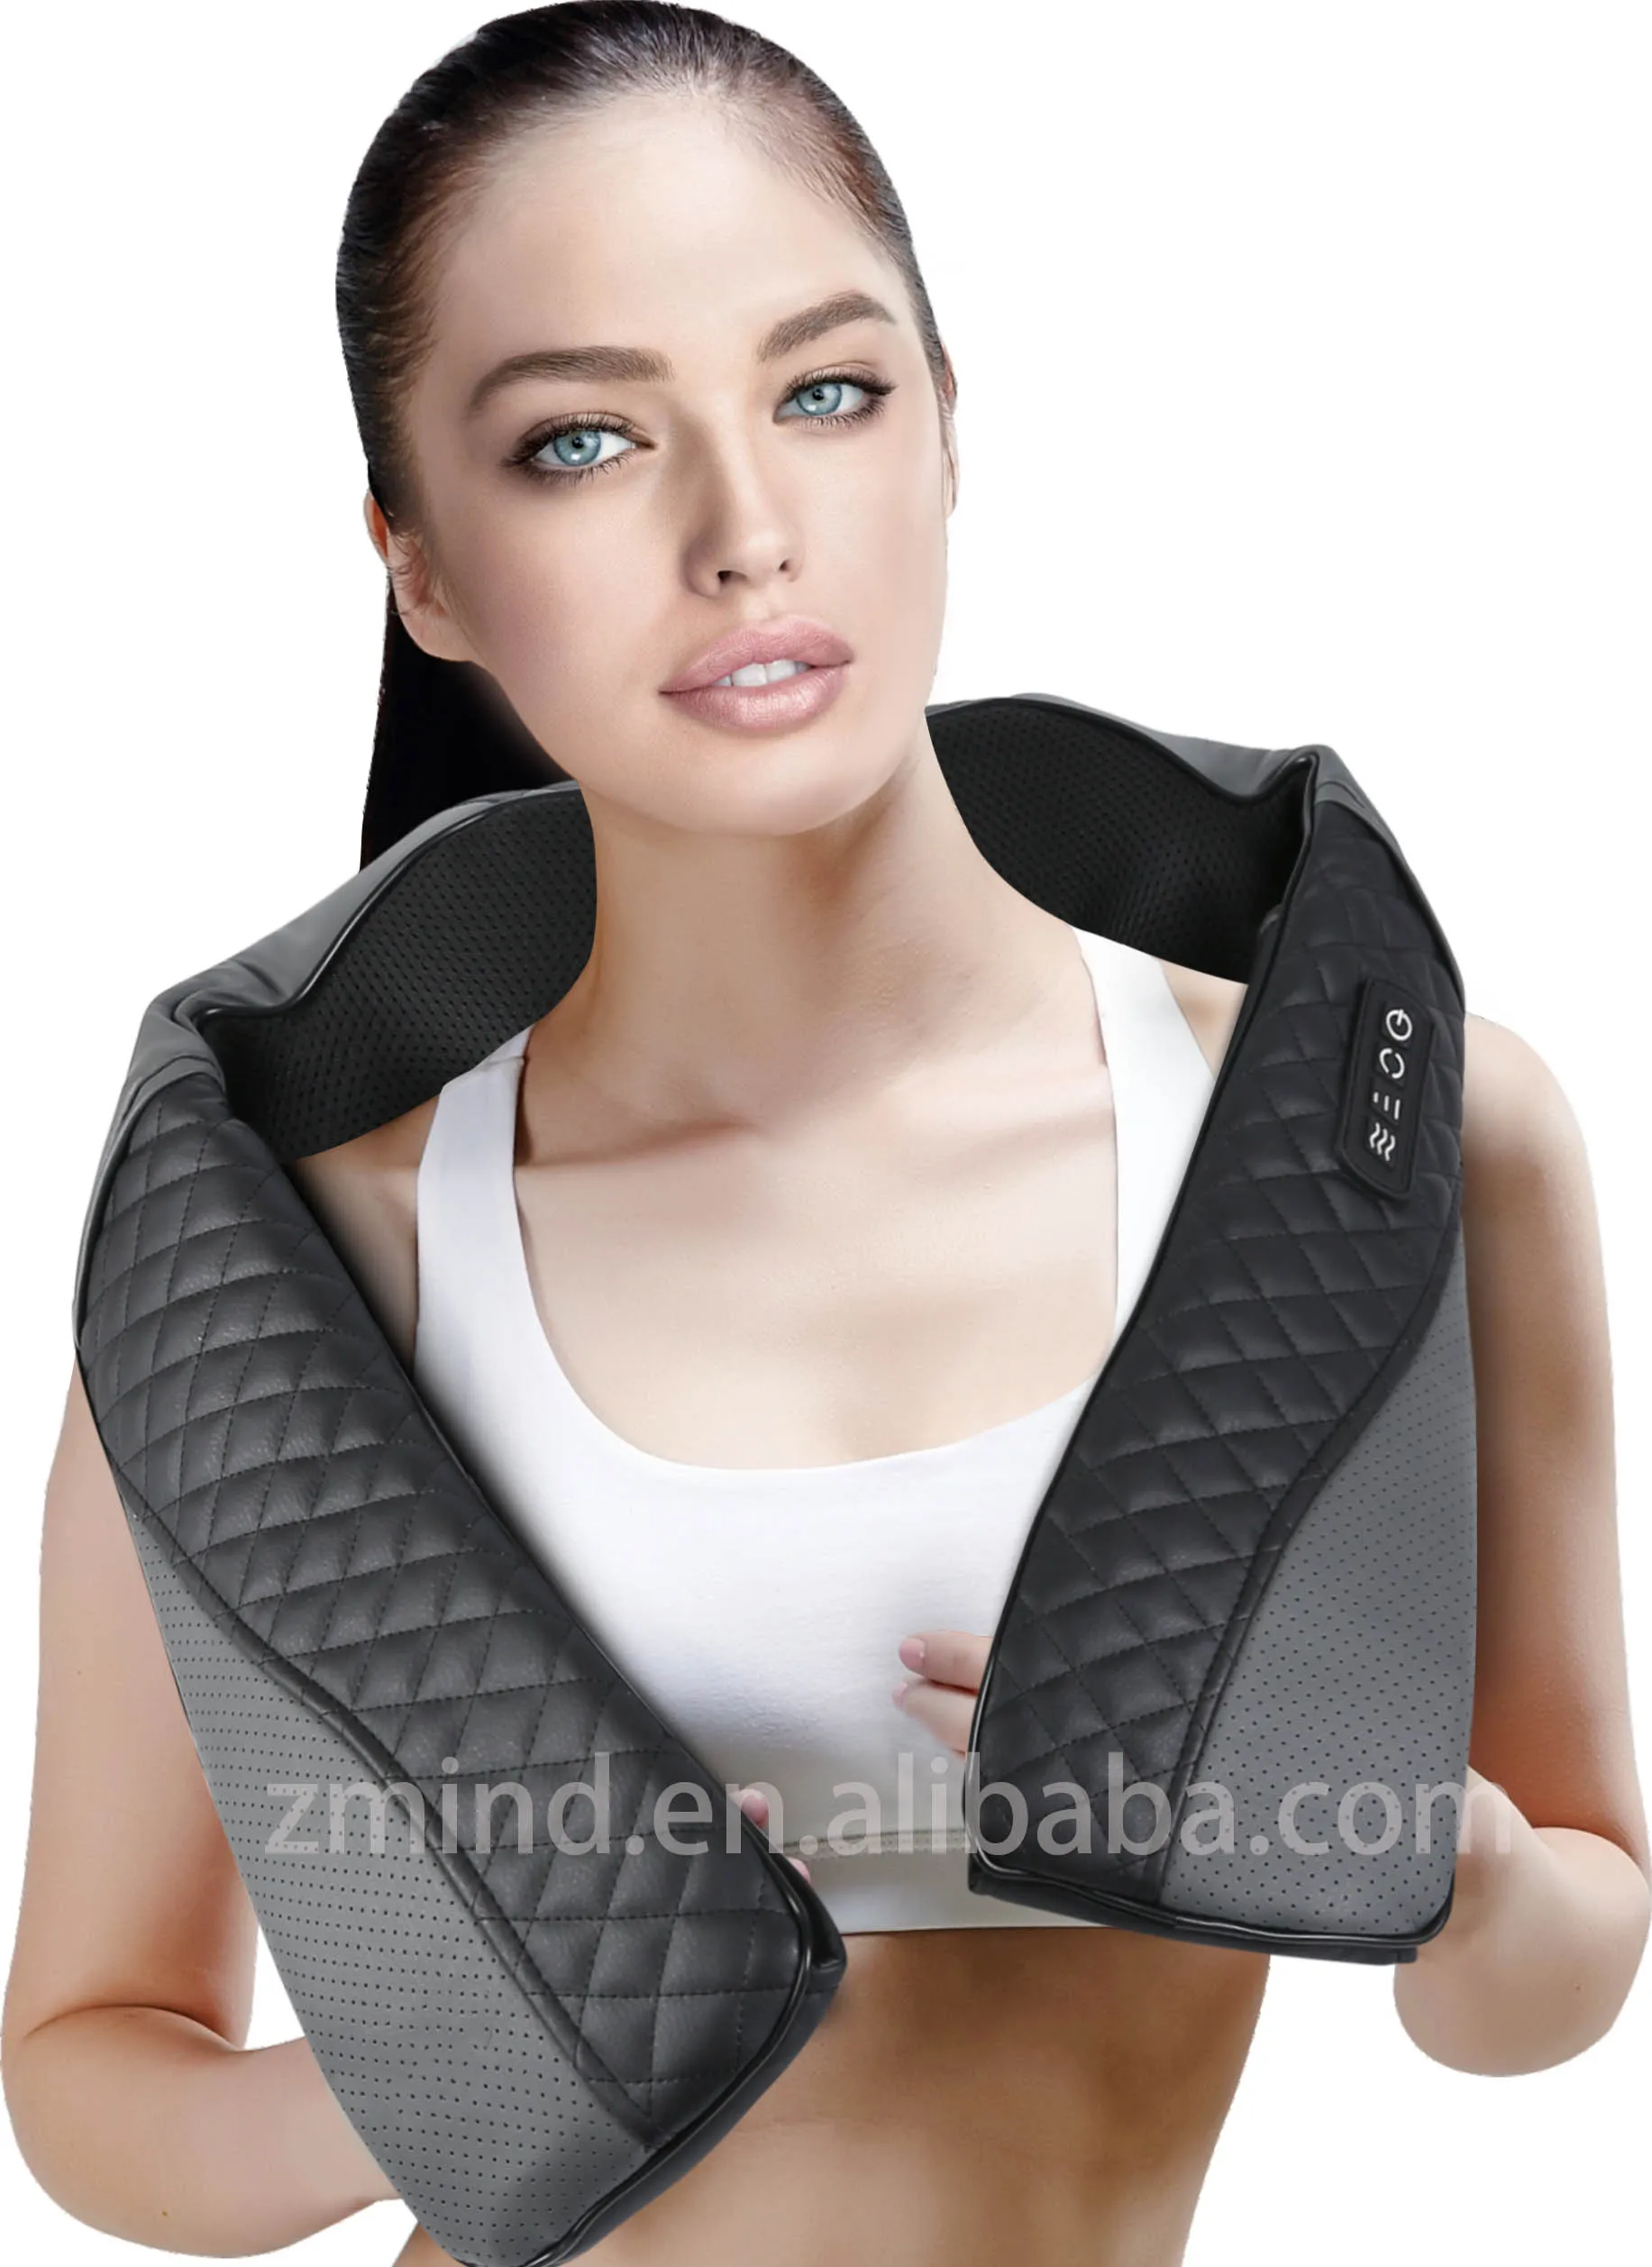 RESTECK- Massagers for Neck and Back with Heat